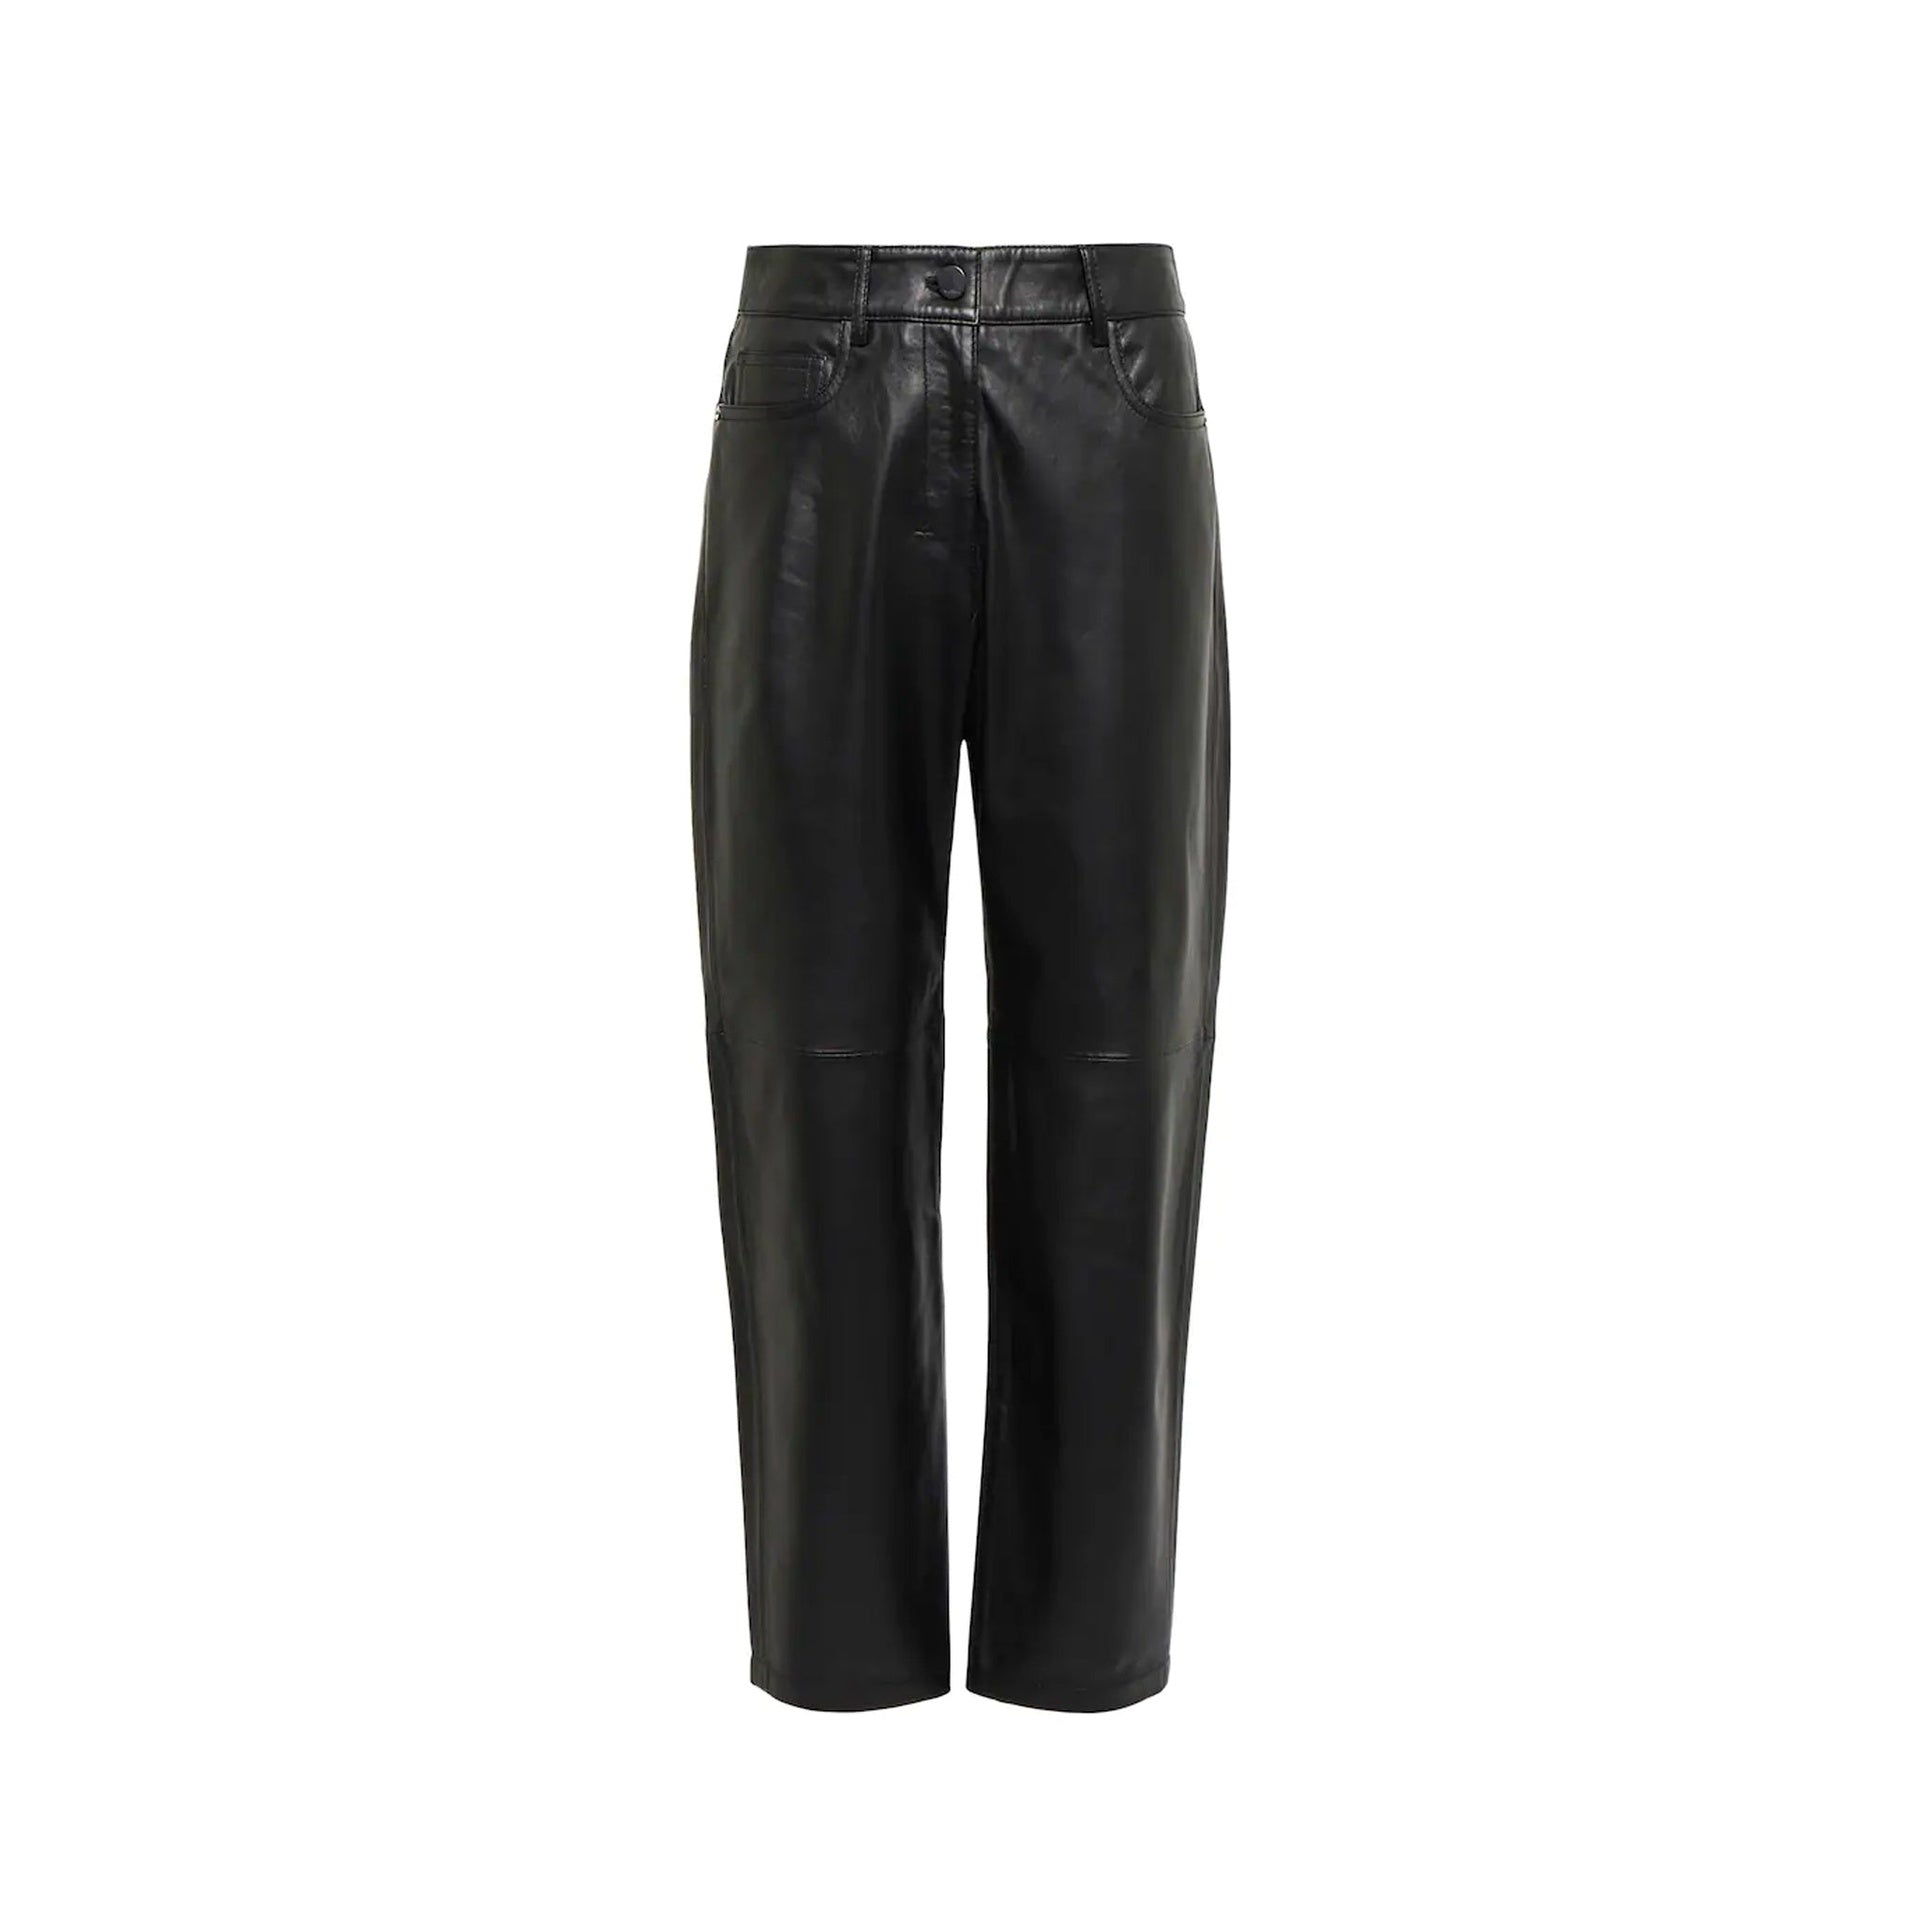 S-MAX-MARA-OUTLET-SALE-s-Max-Mara-Liana-Leather-Pants-Hosen-BLACK-42-ARCHIVE-COLLECTION.jpg